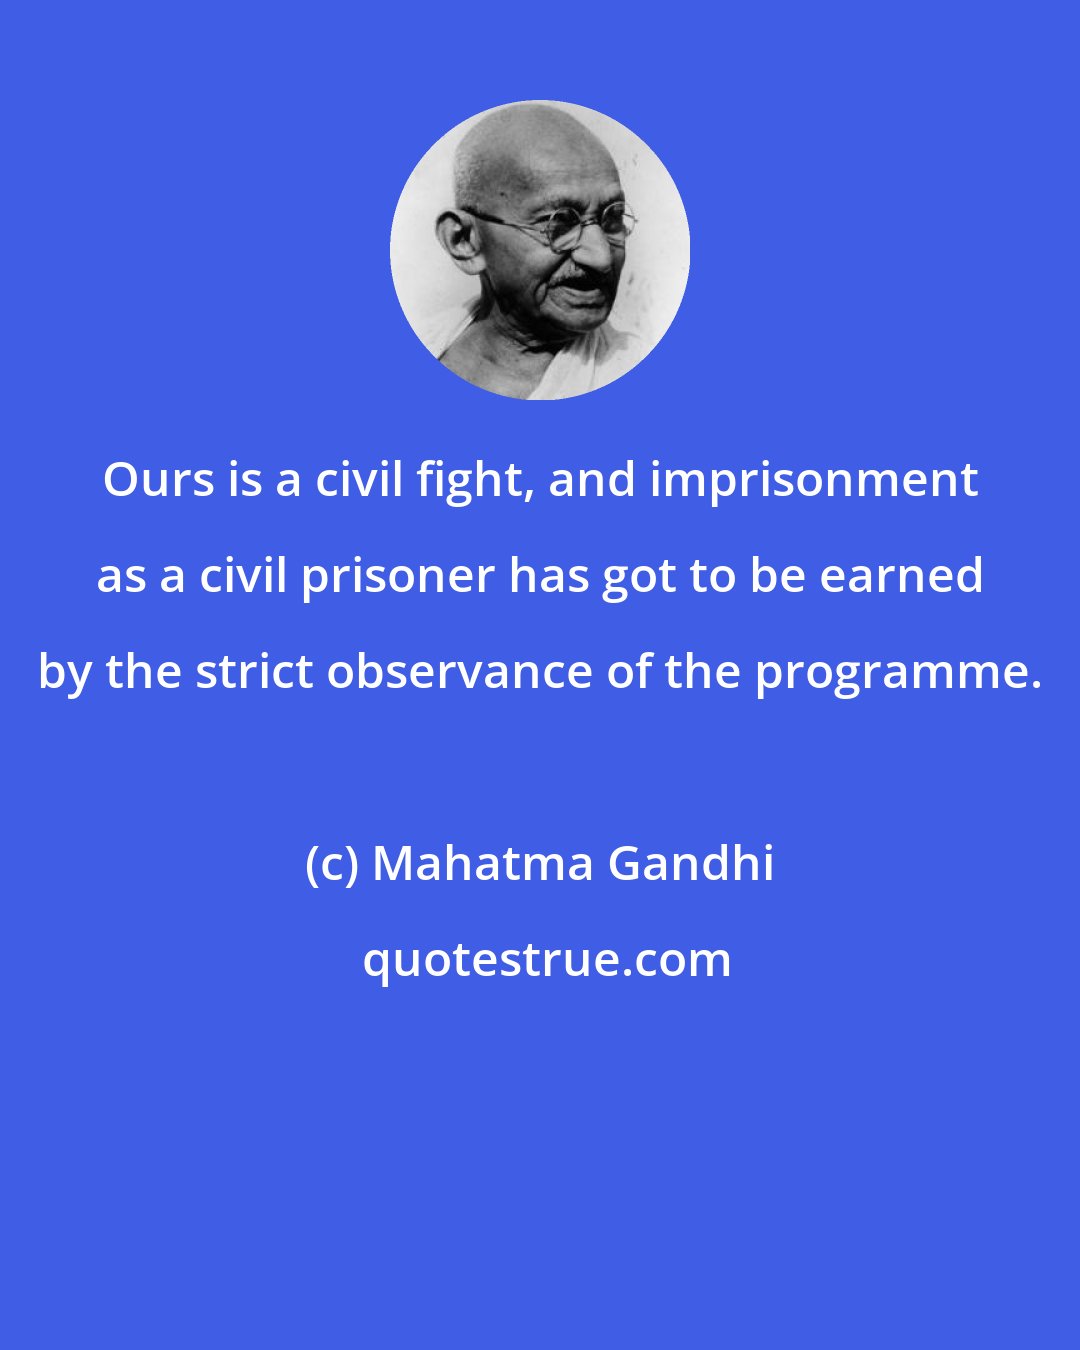 Mahatma Gandhi: Ours is a civil fight, and imprisonment as a civil prisoner has got to be earned by the strict observance of the programme.